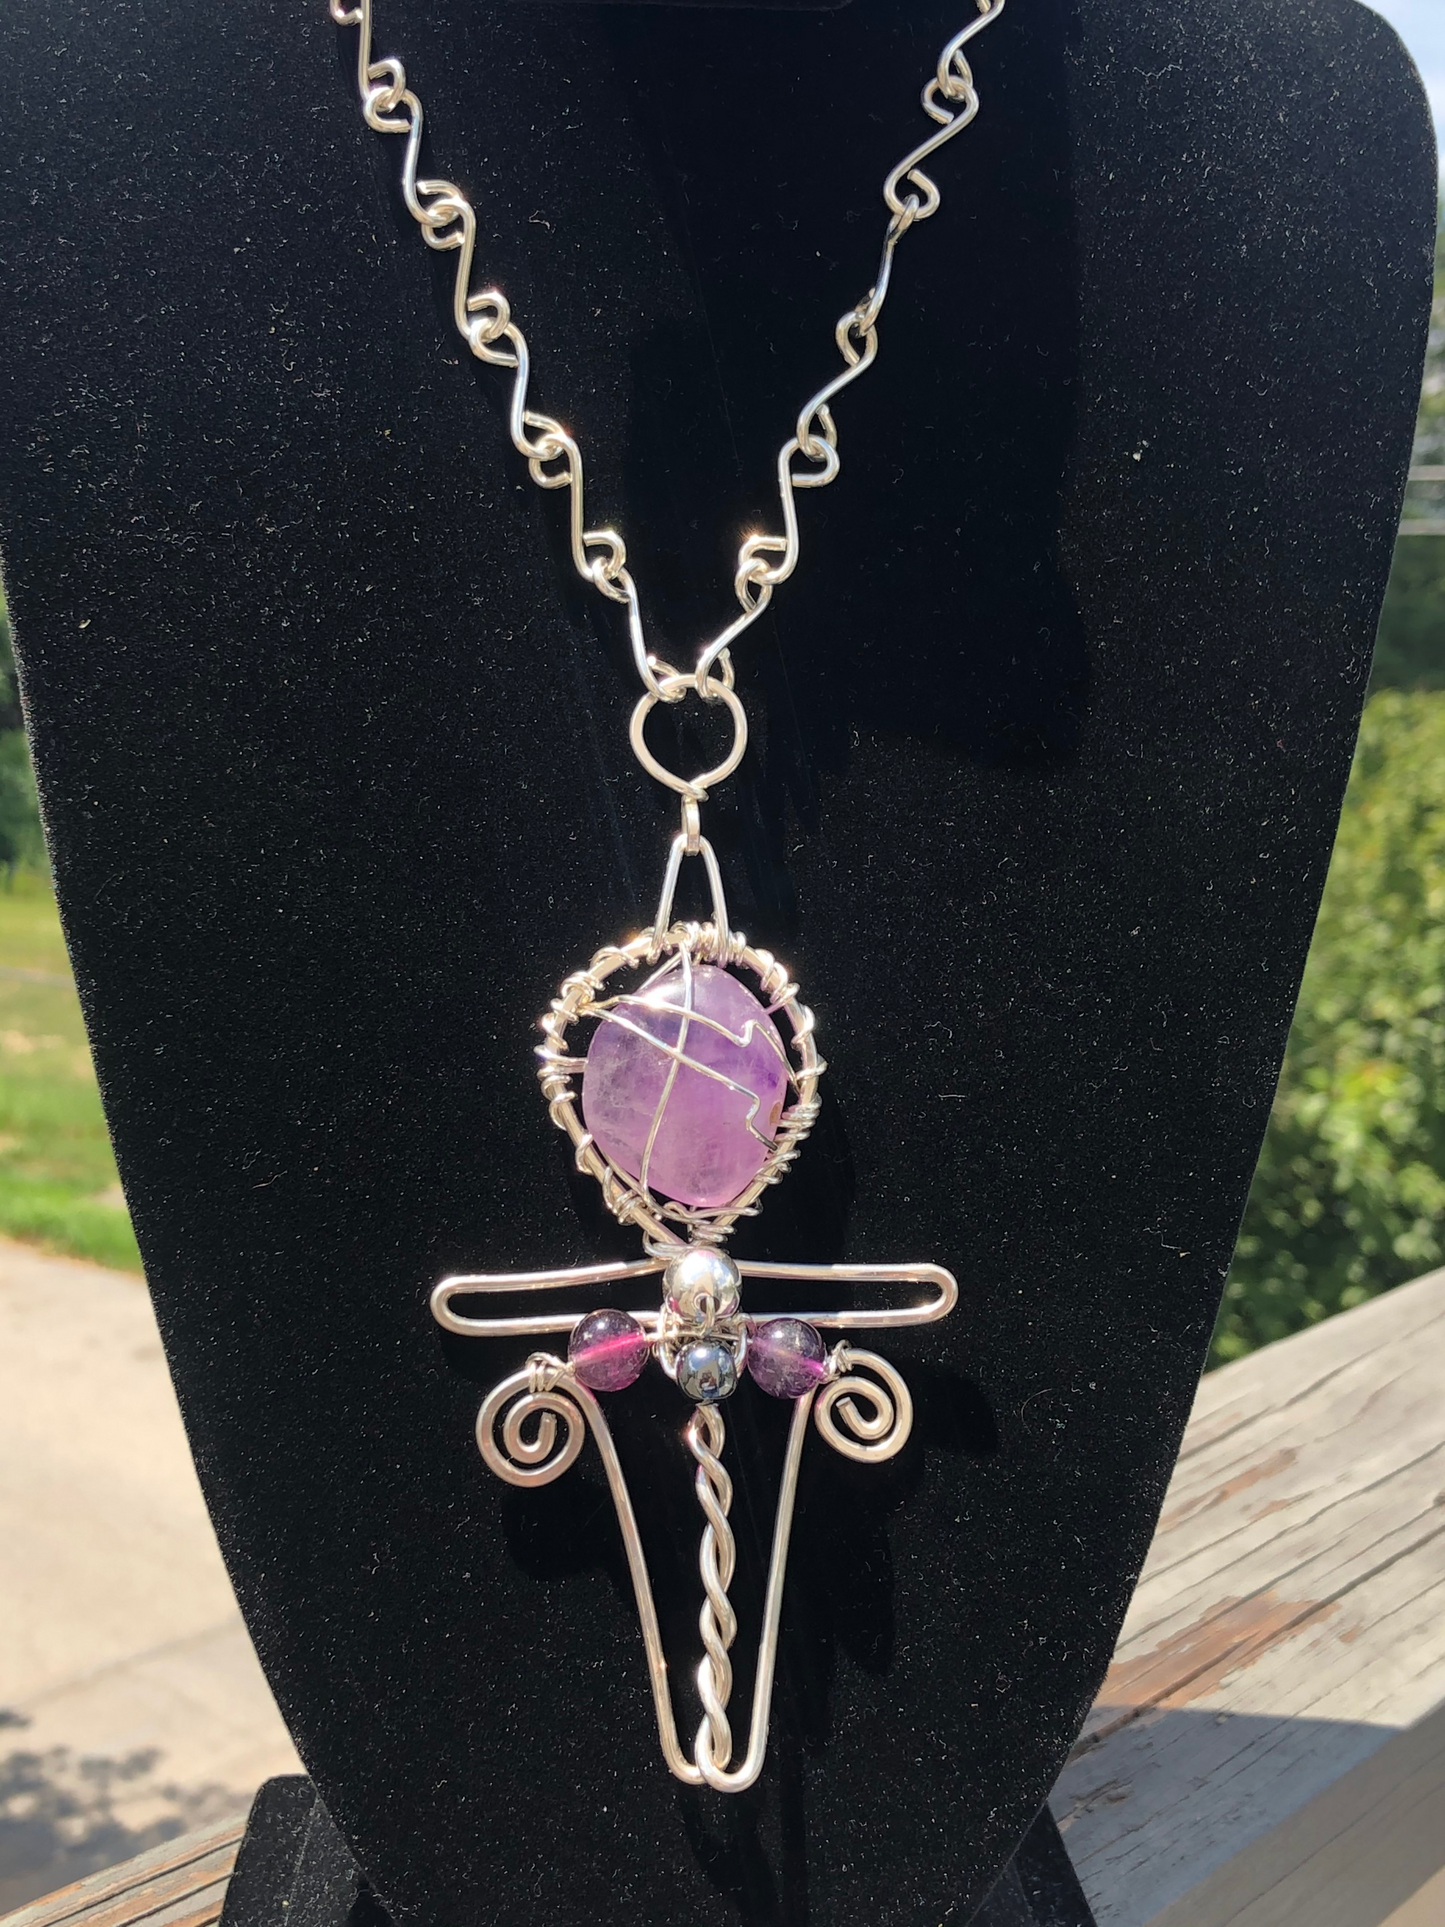 SILVER ANKH NECKLACE + AMETHYST